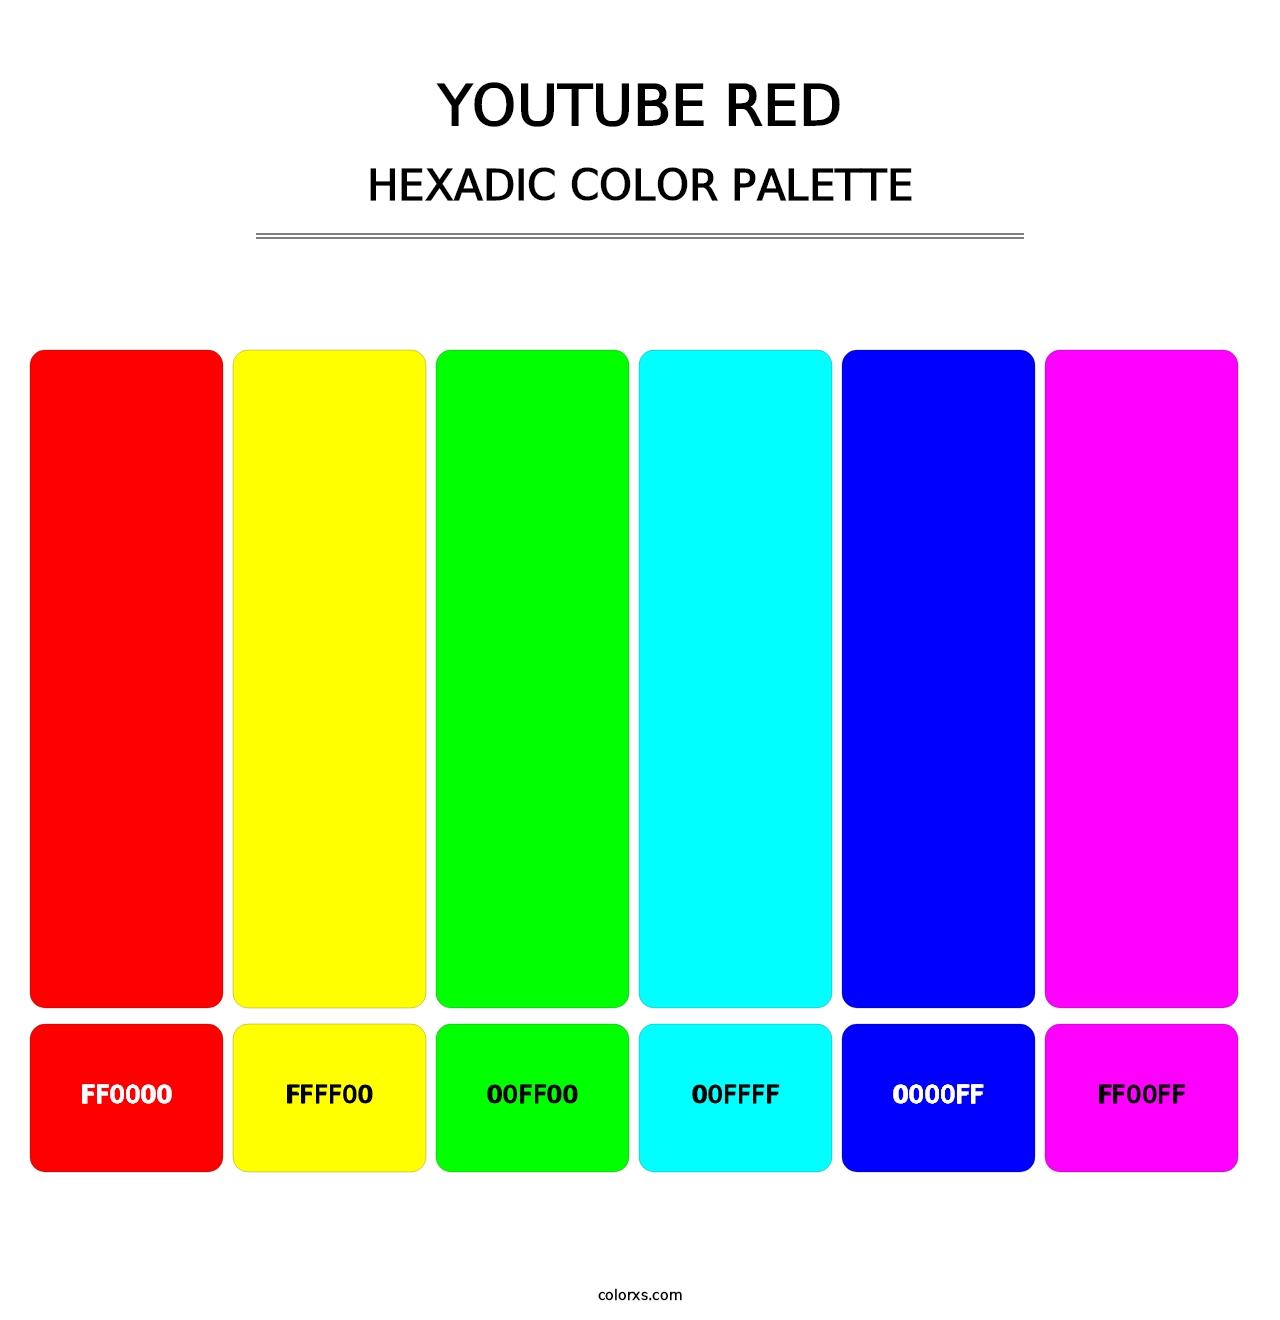 YouTube Red - Hexadic Color Palette